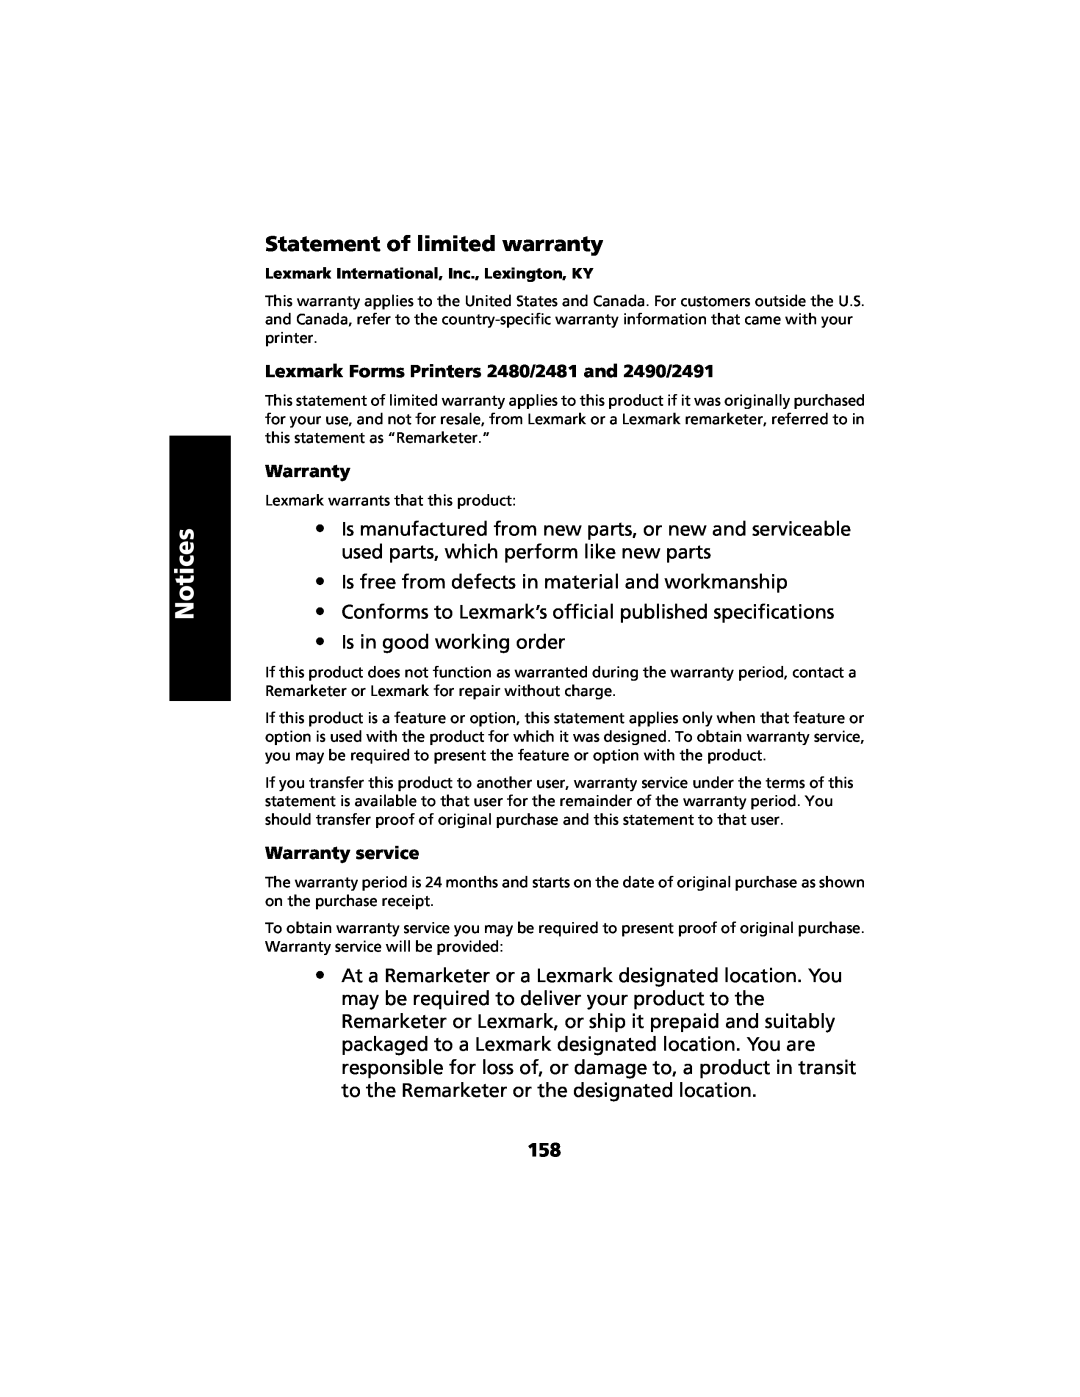 Lexmark 2480 manual Statement of limited warranty, Notices, Is free from defects in material and workmanship 